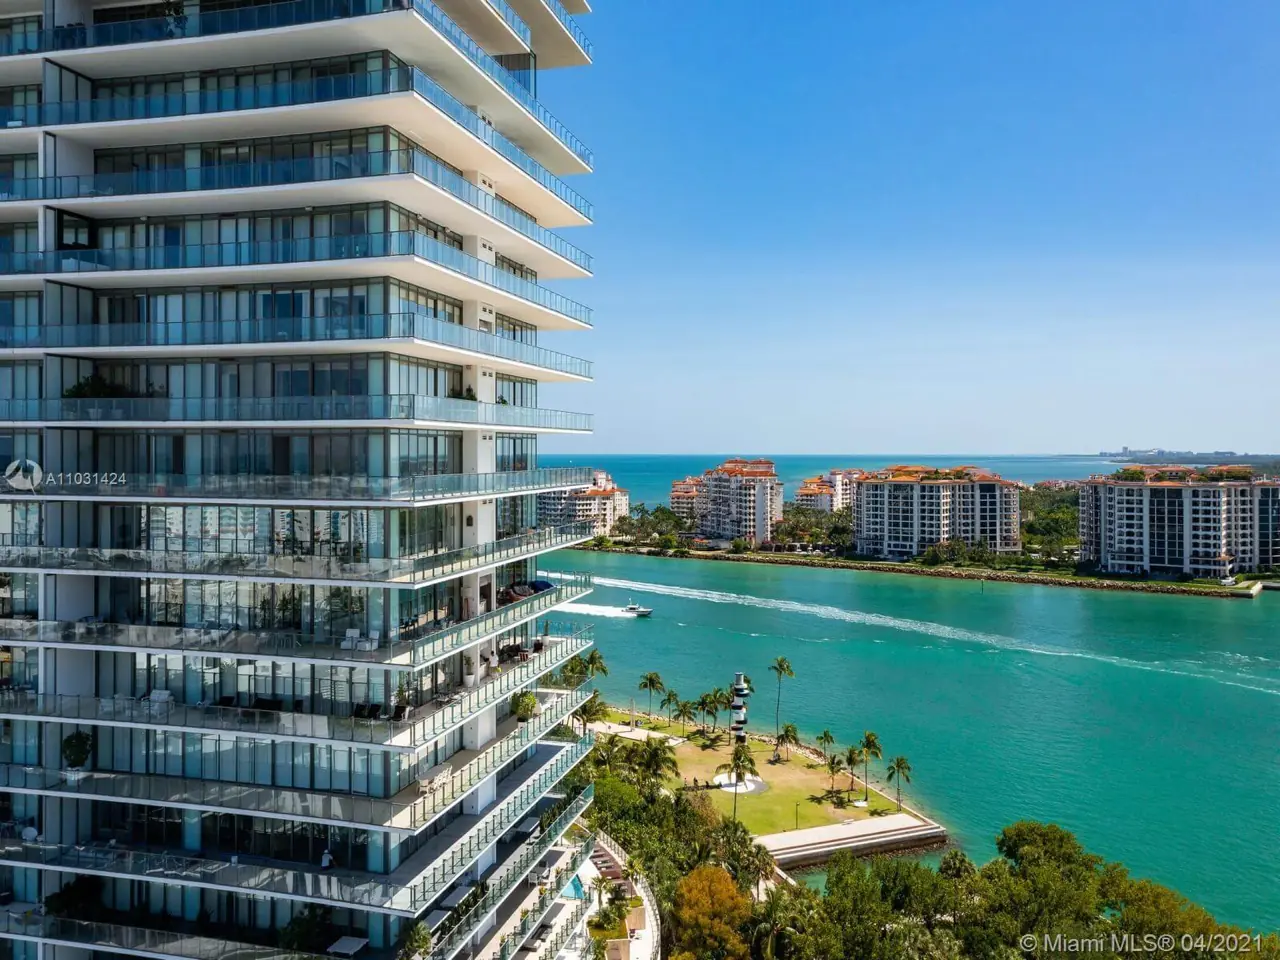 Apogee South Beach - Stunning Views of Atlantic Ocean and Biscayne Bay